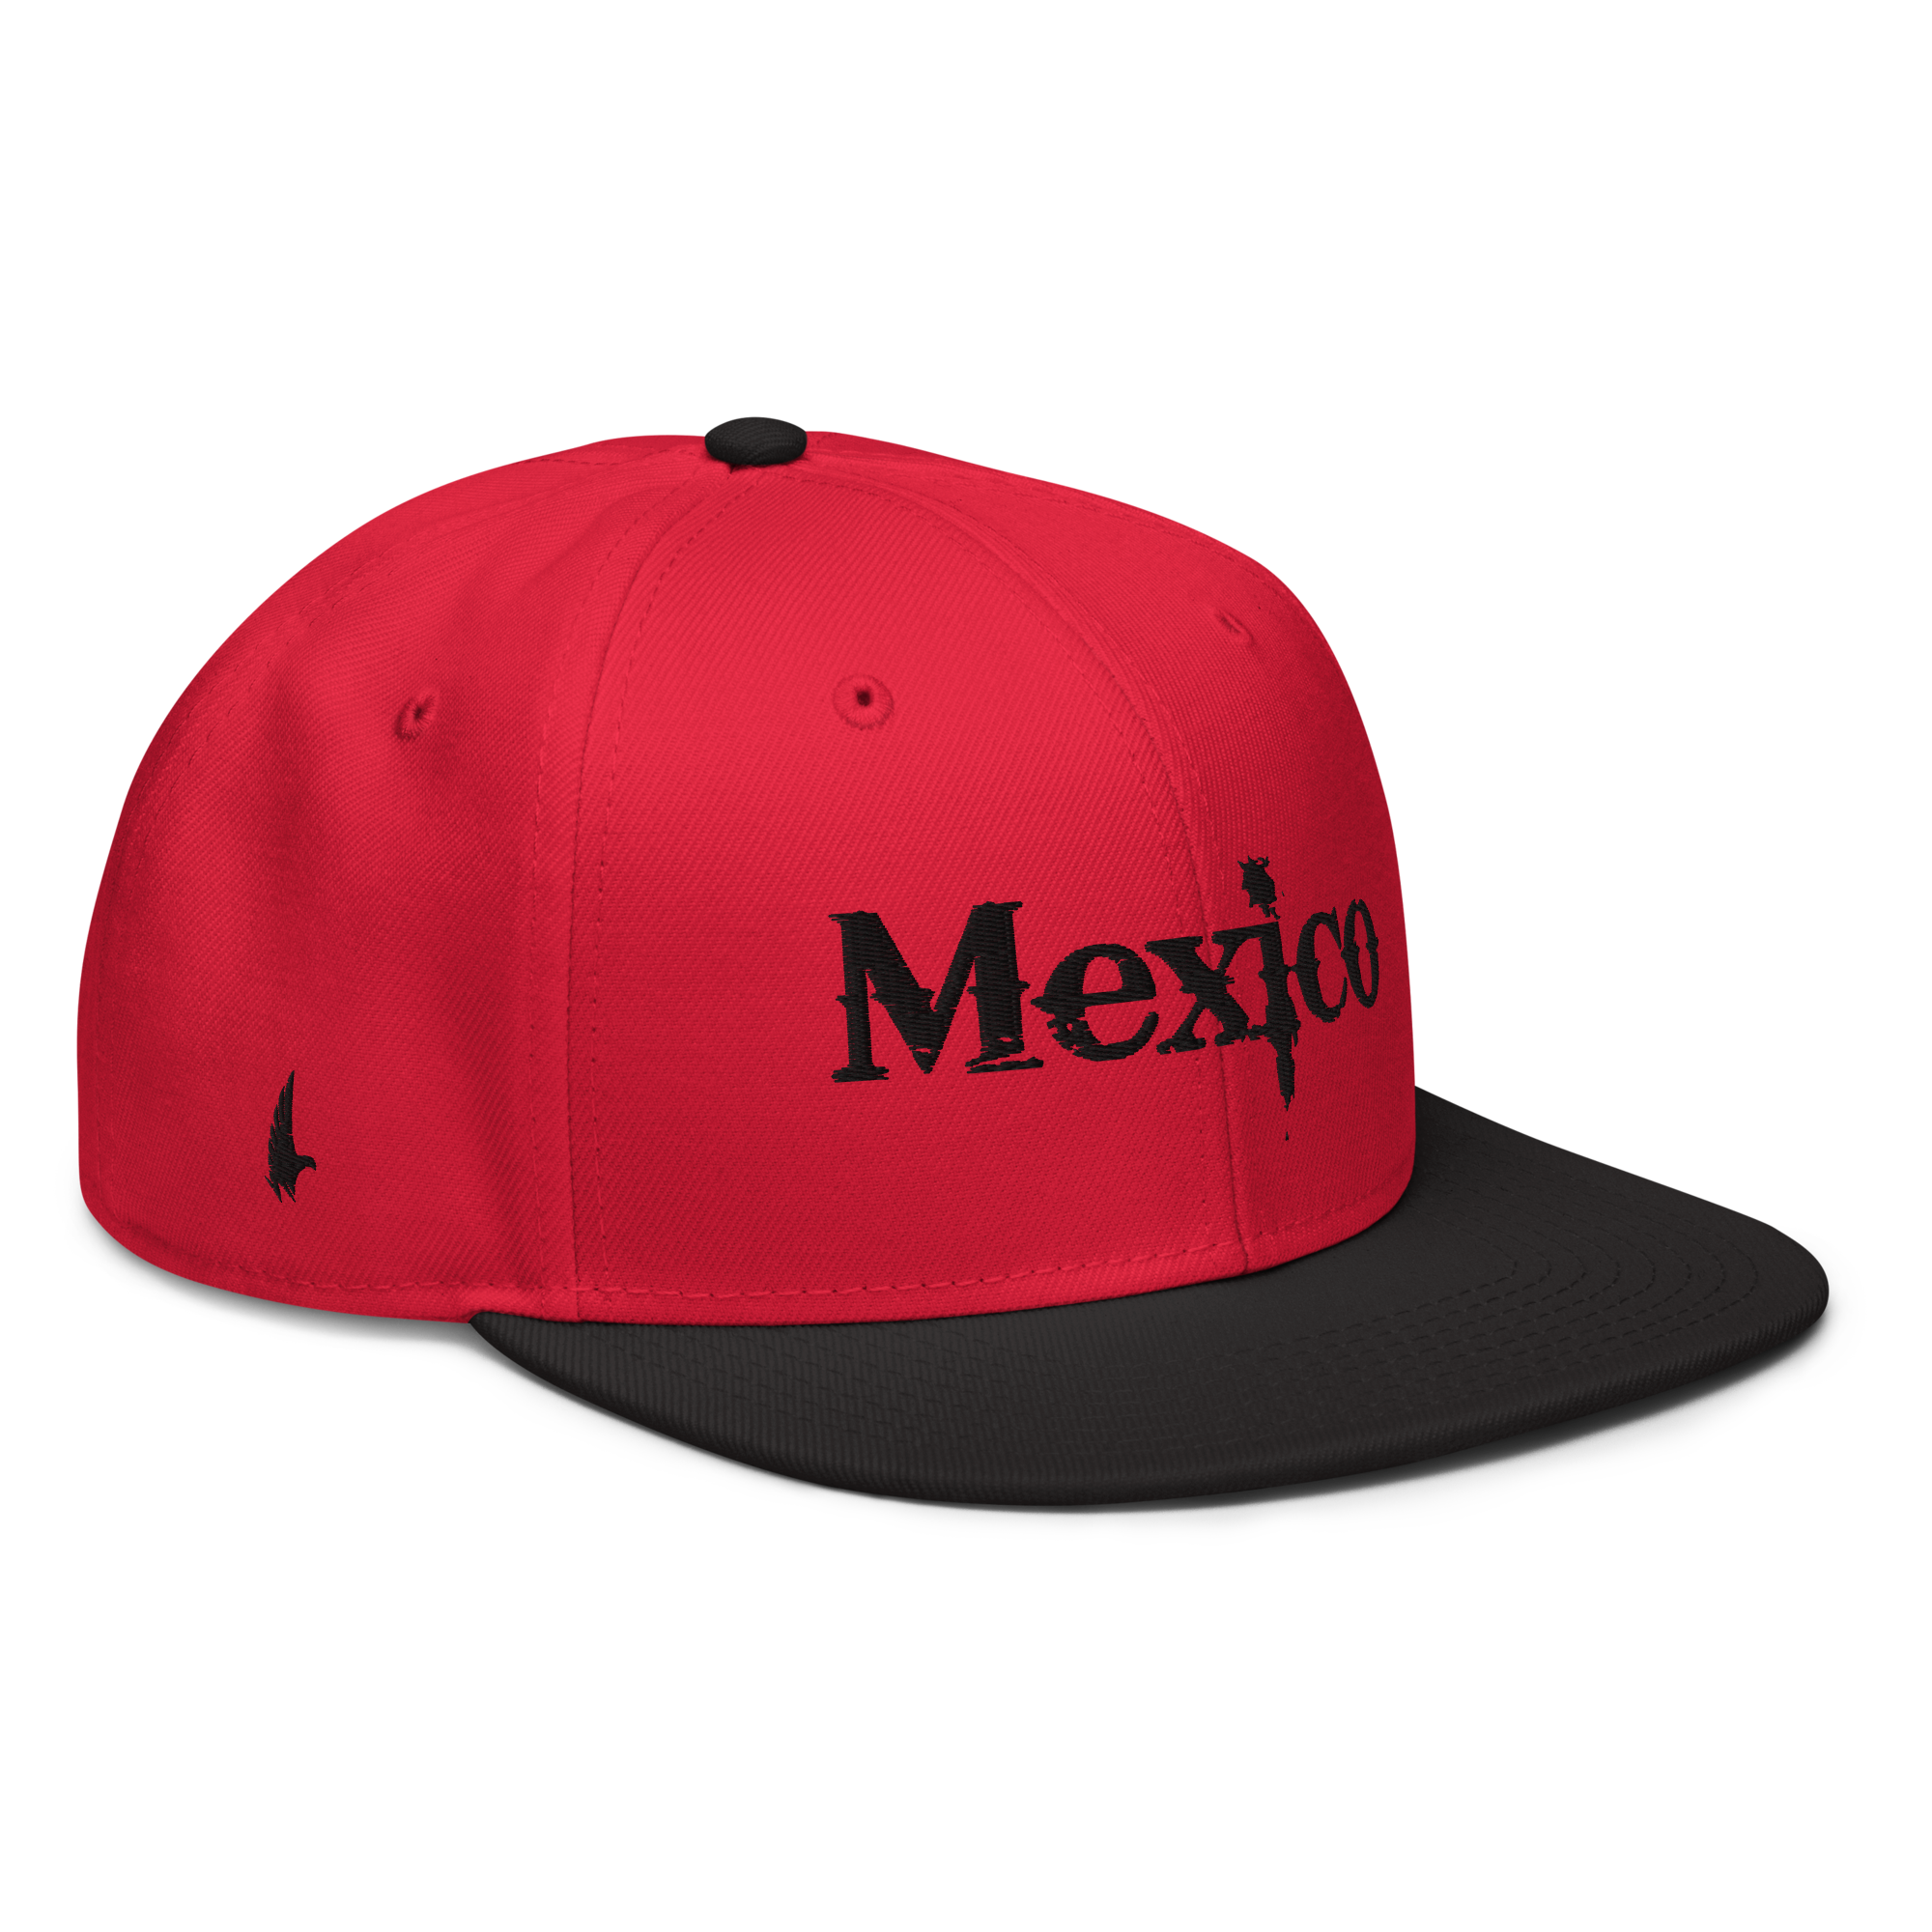 Mexico Snapback Hat - Red/Black/Black OS - Loyalty Vibes